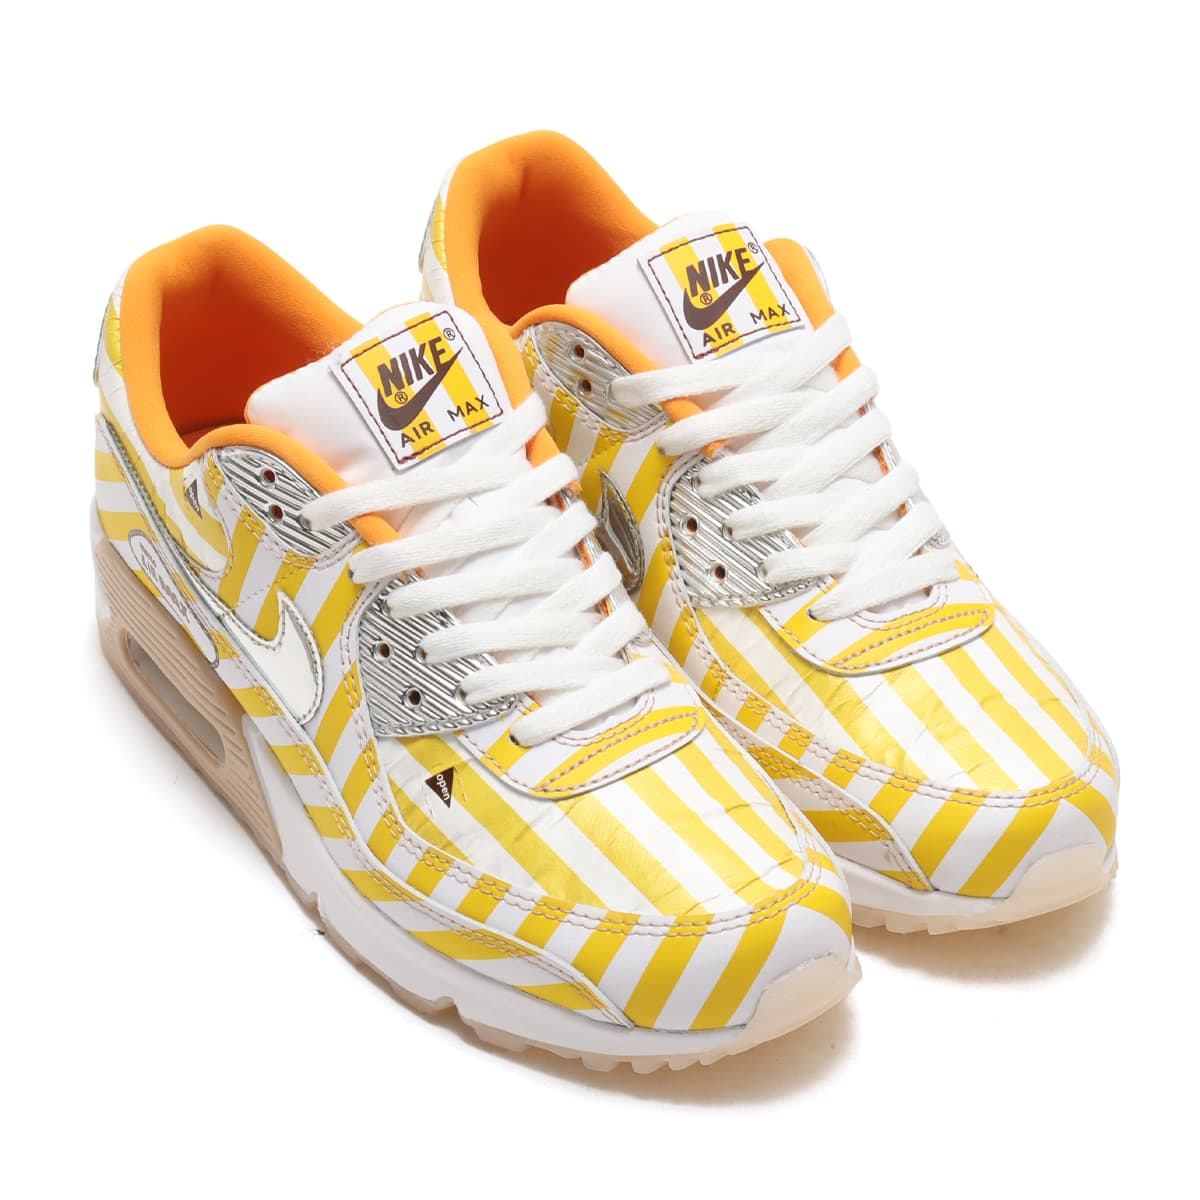 NIKE AIR MAX 90 SE SPEED YELLOW/SHIMMER-WHITE-SIREN RED 21SP-I